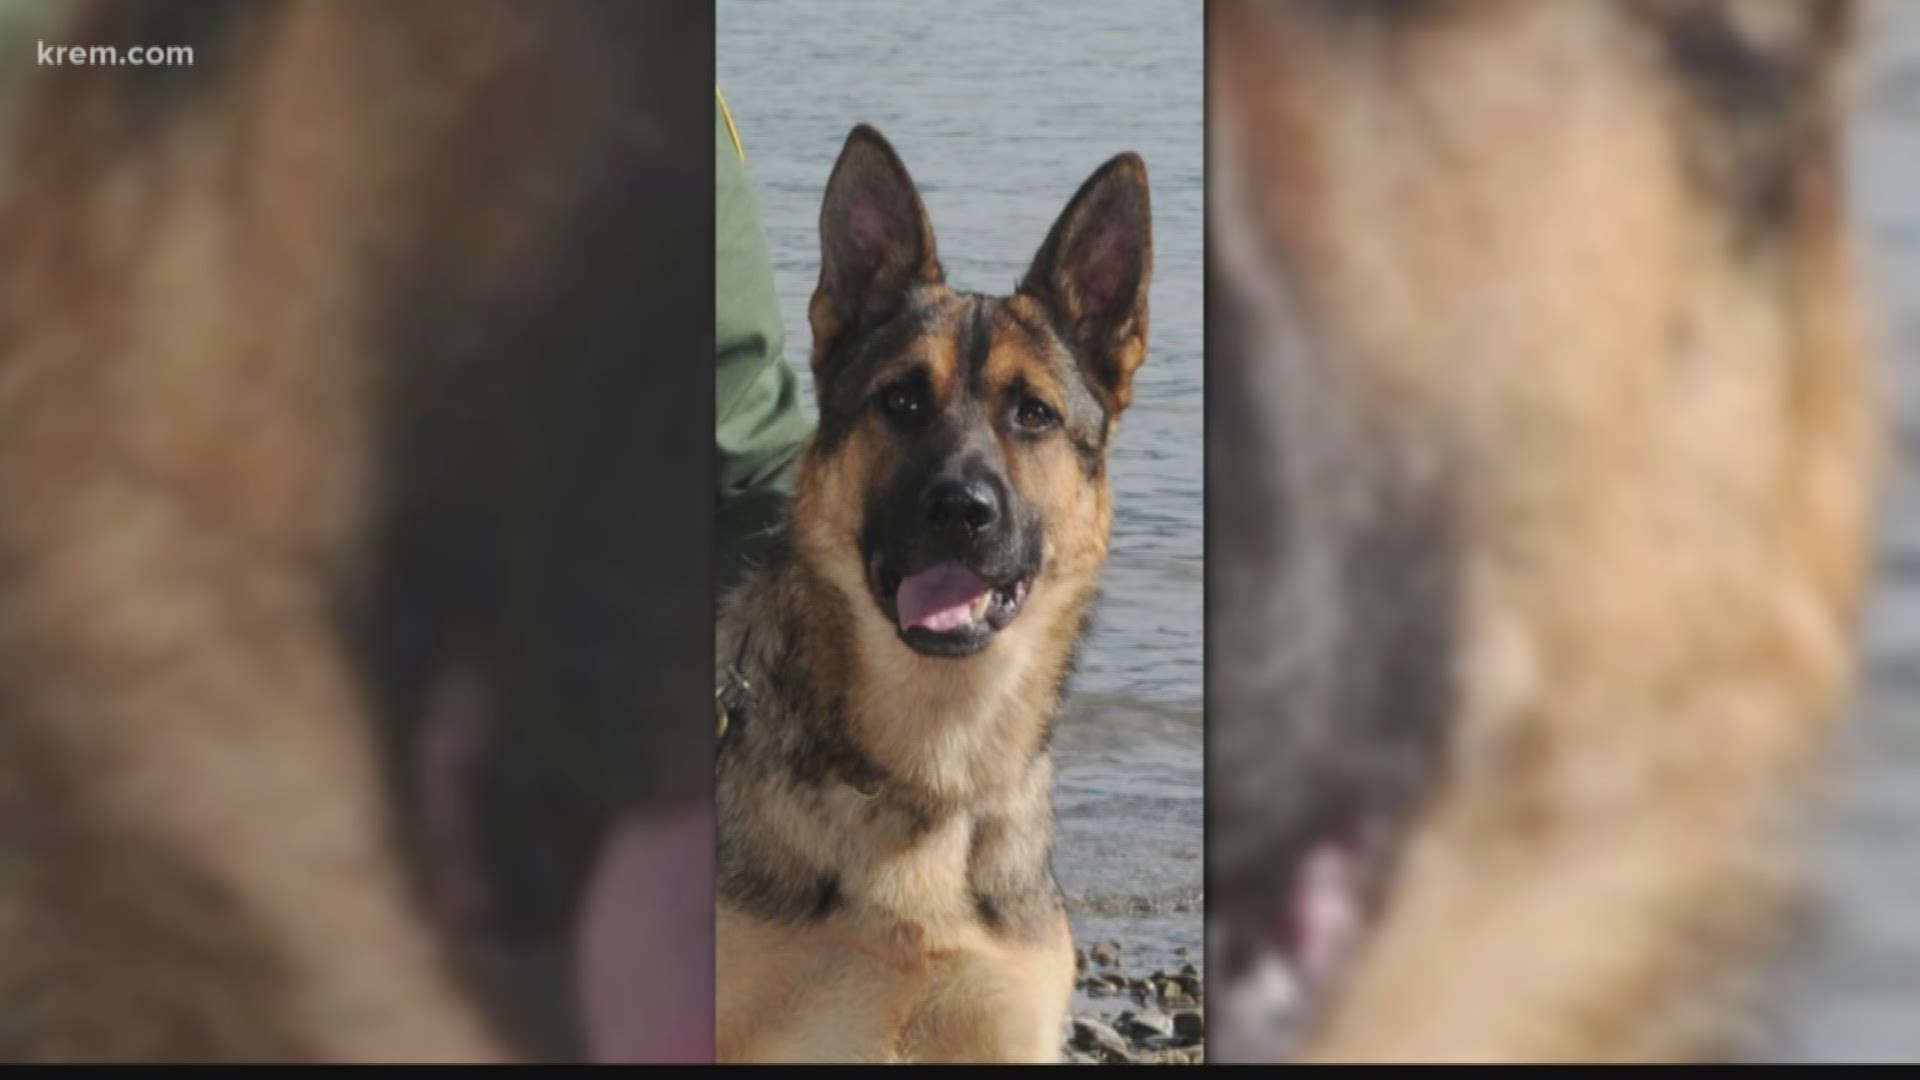 A U.S. Border Patrol agent's car slid on black ice near Colville, leaving him with multiple injuries and killing his K-9 agent.